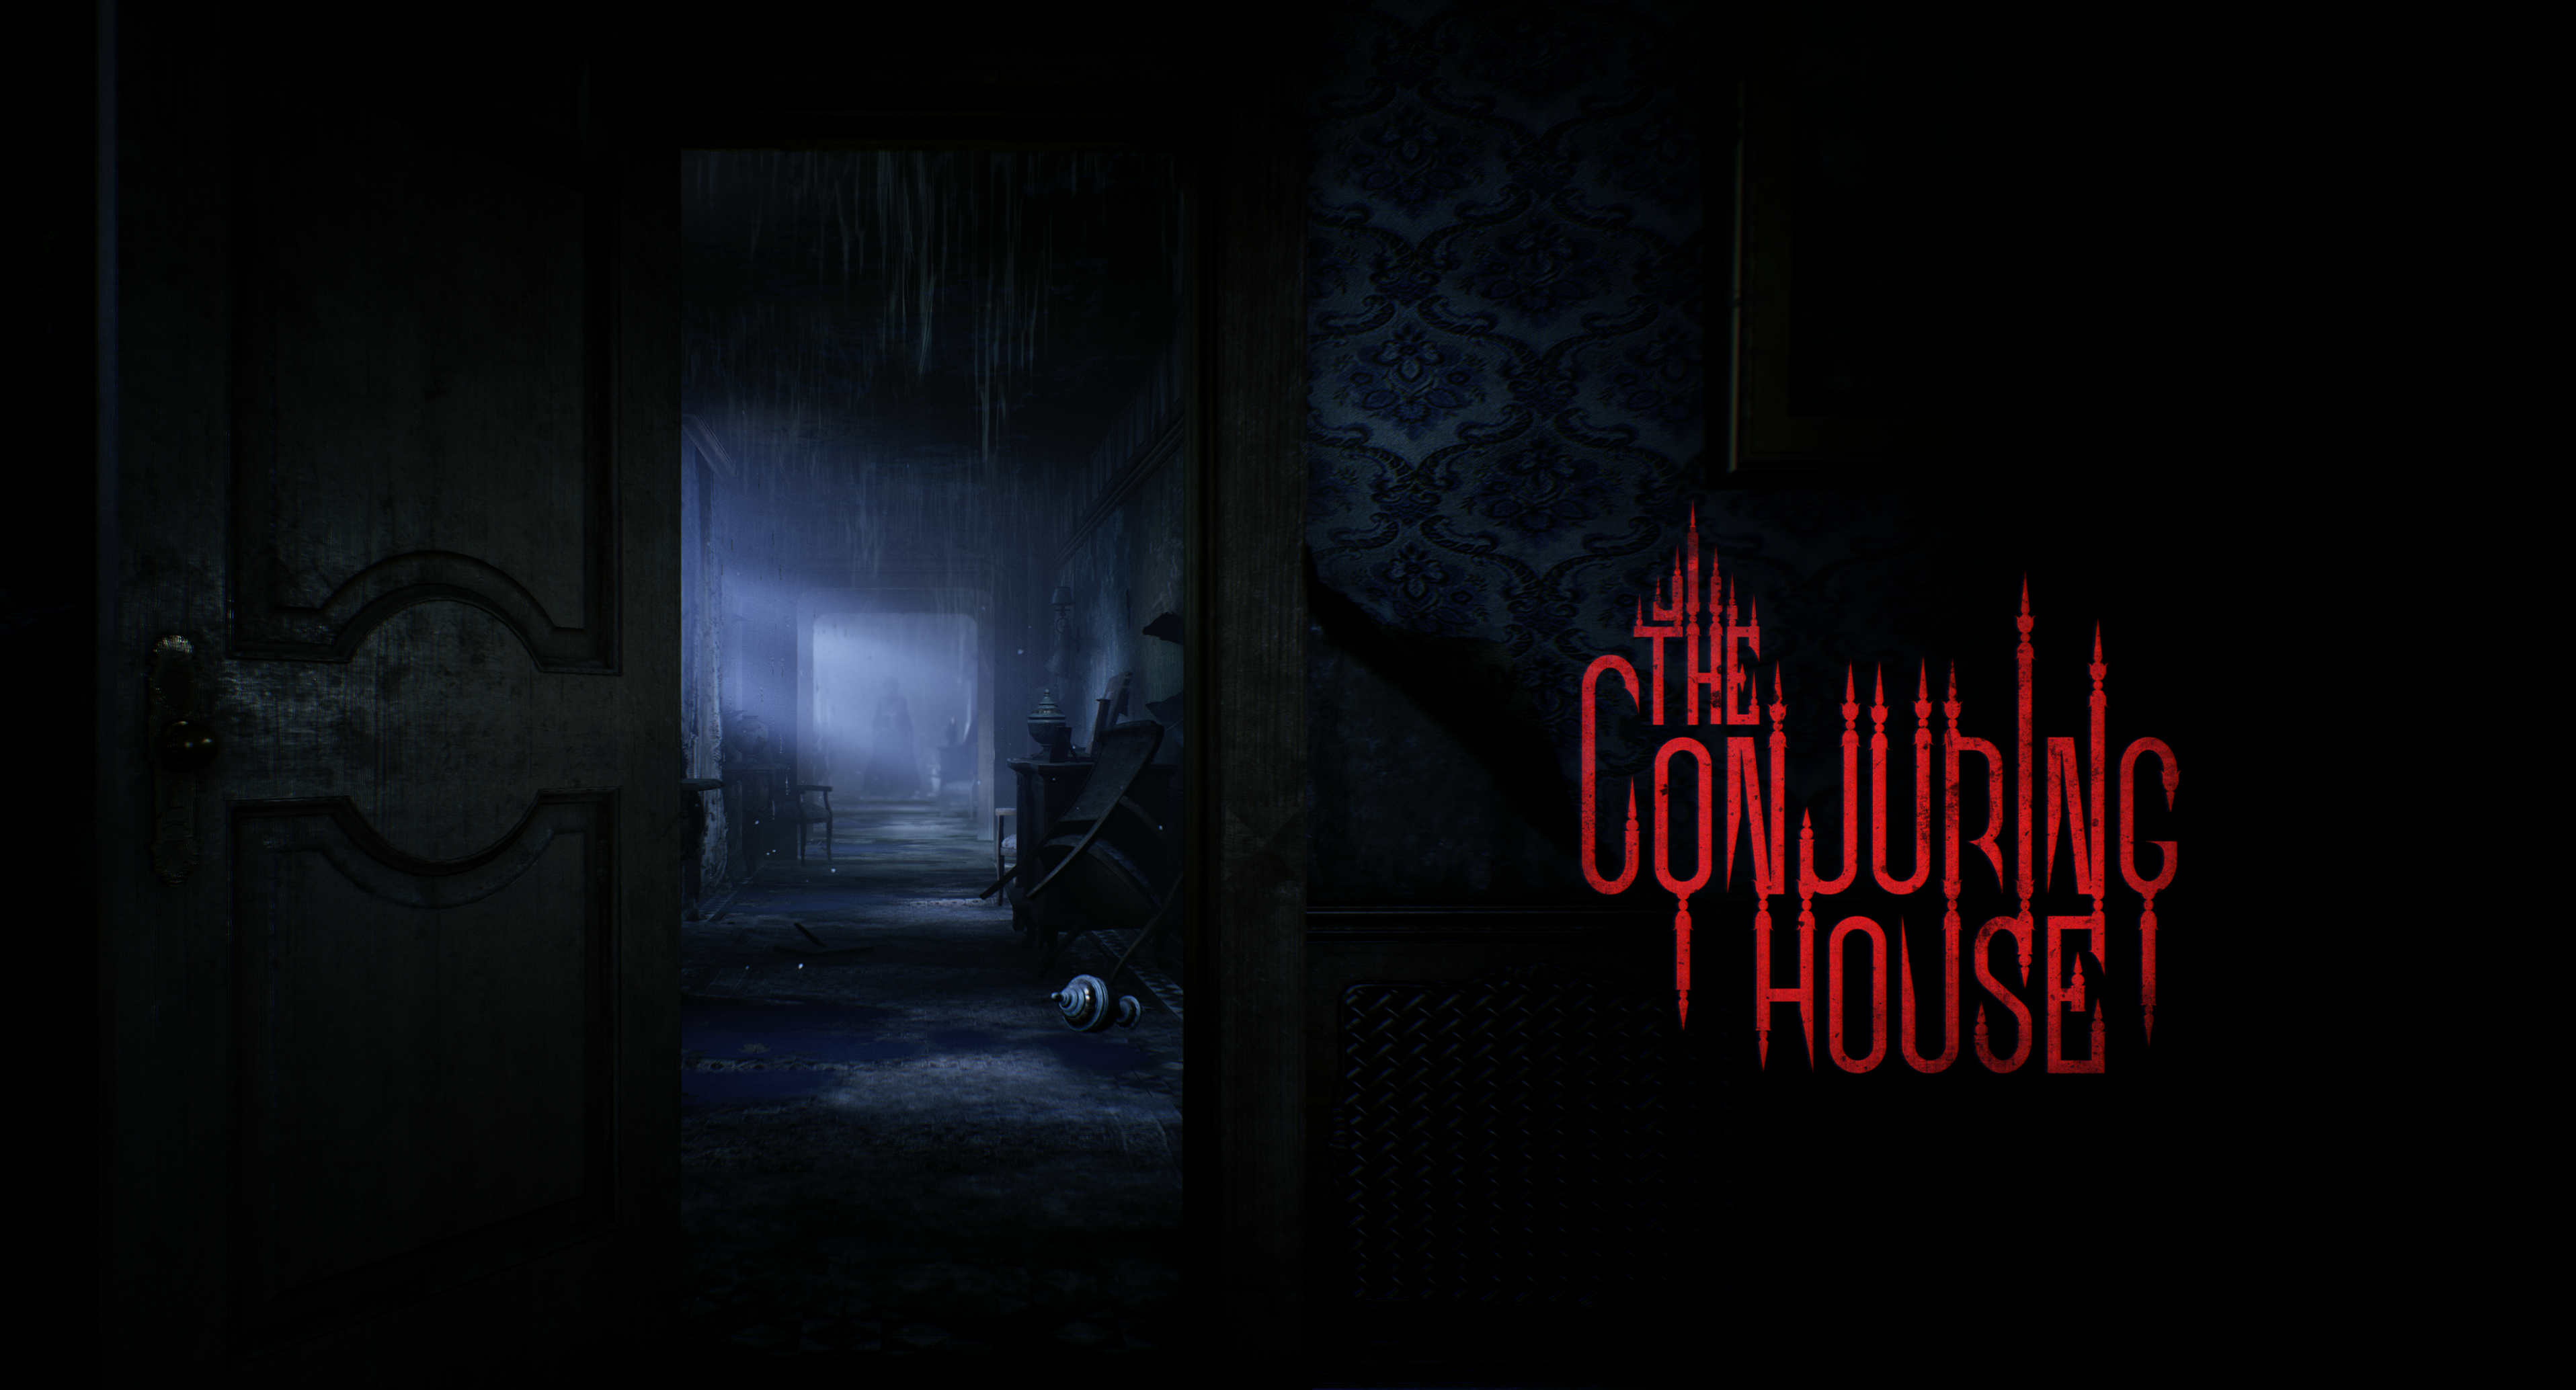 prepare-to-be-hunted-in-the-conjuring-house-coming-soon-to-steam-frikgiamers.com.jpg